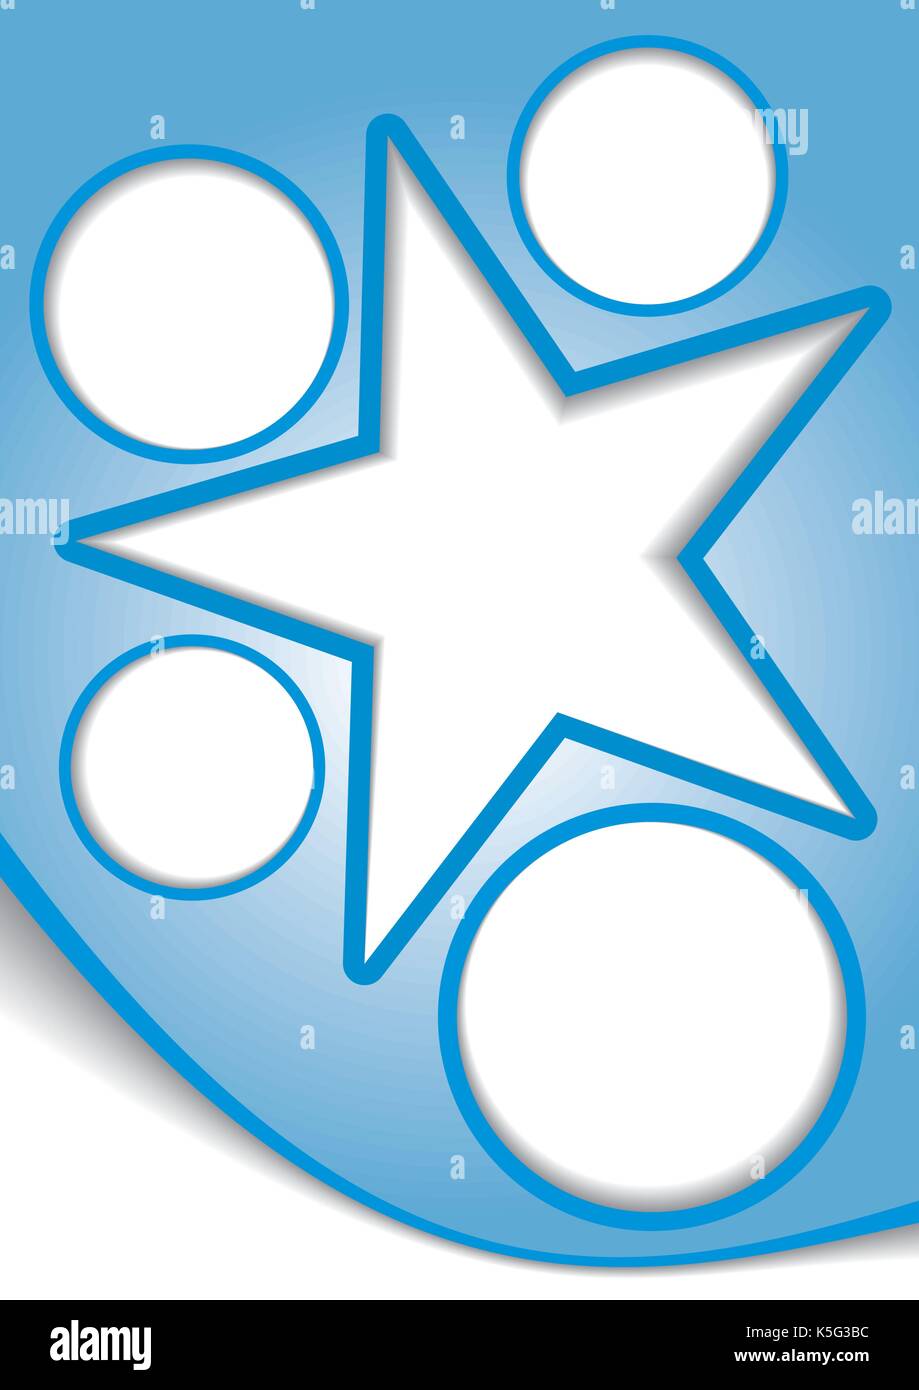 Star layout Stock Vector